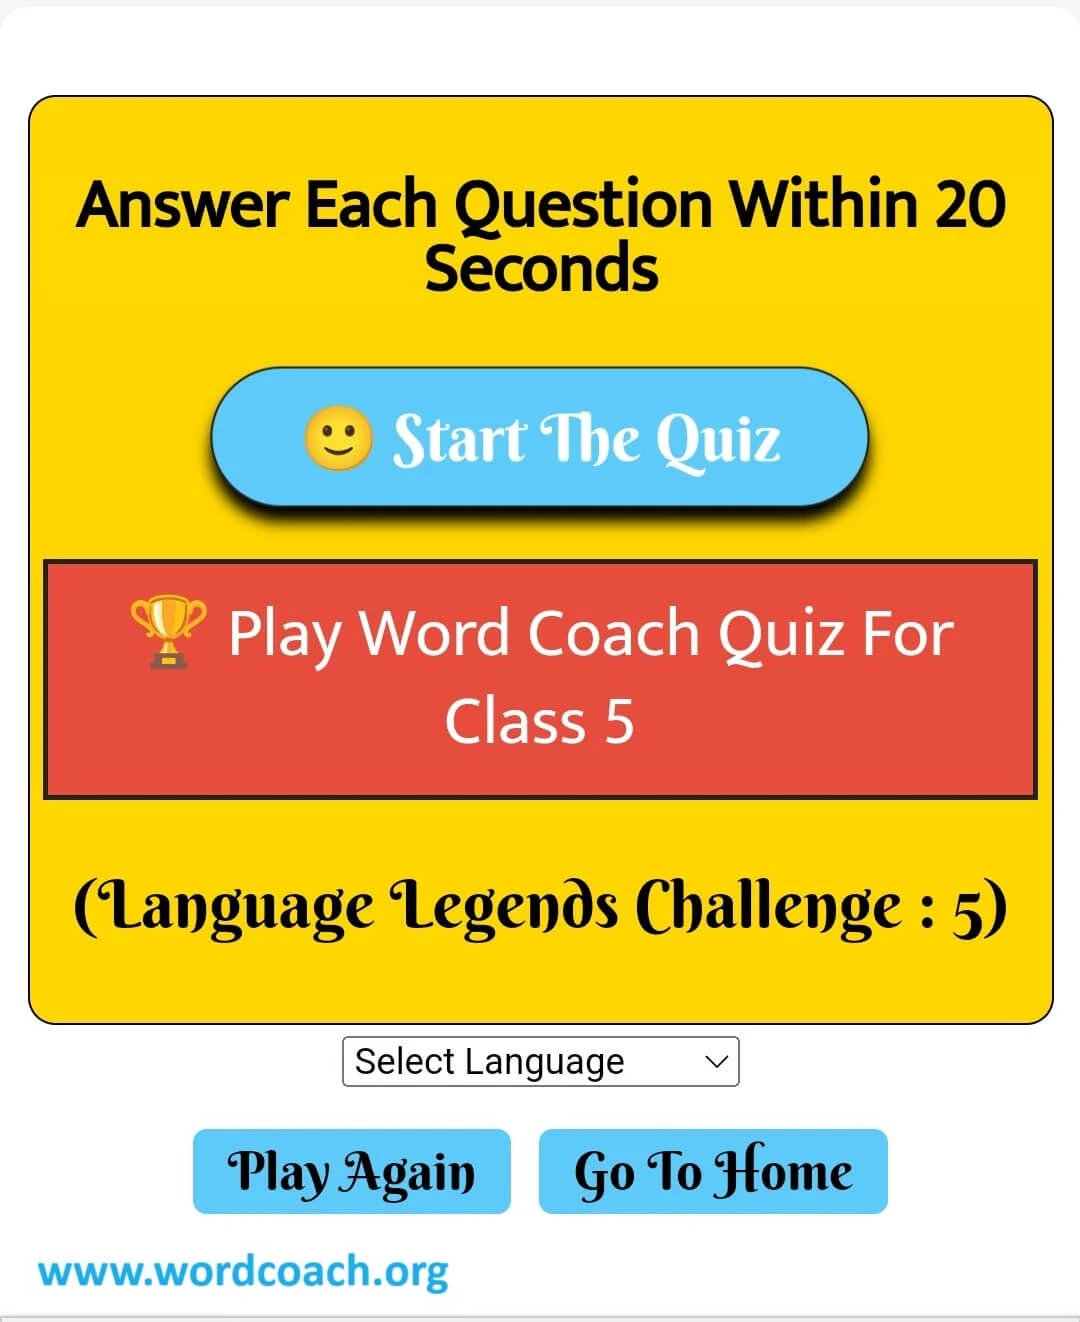 Experience The Magic Of Words With The Class 5 Word Coach Quiz. Play The Game Online For Free & Enjoy A Vocabulary Growth Journey Like Never Before - www.wordcoach.org